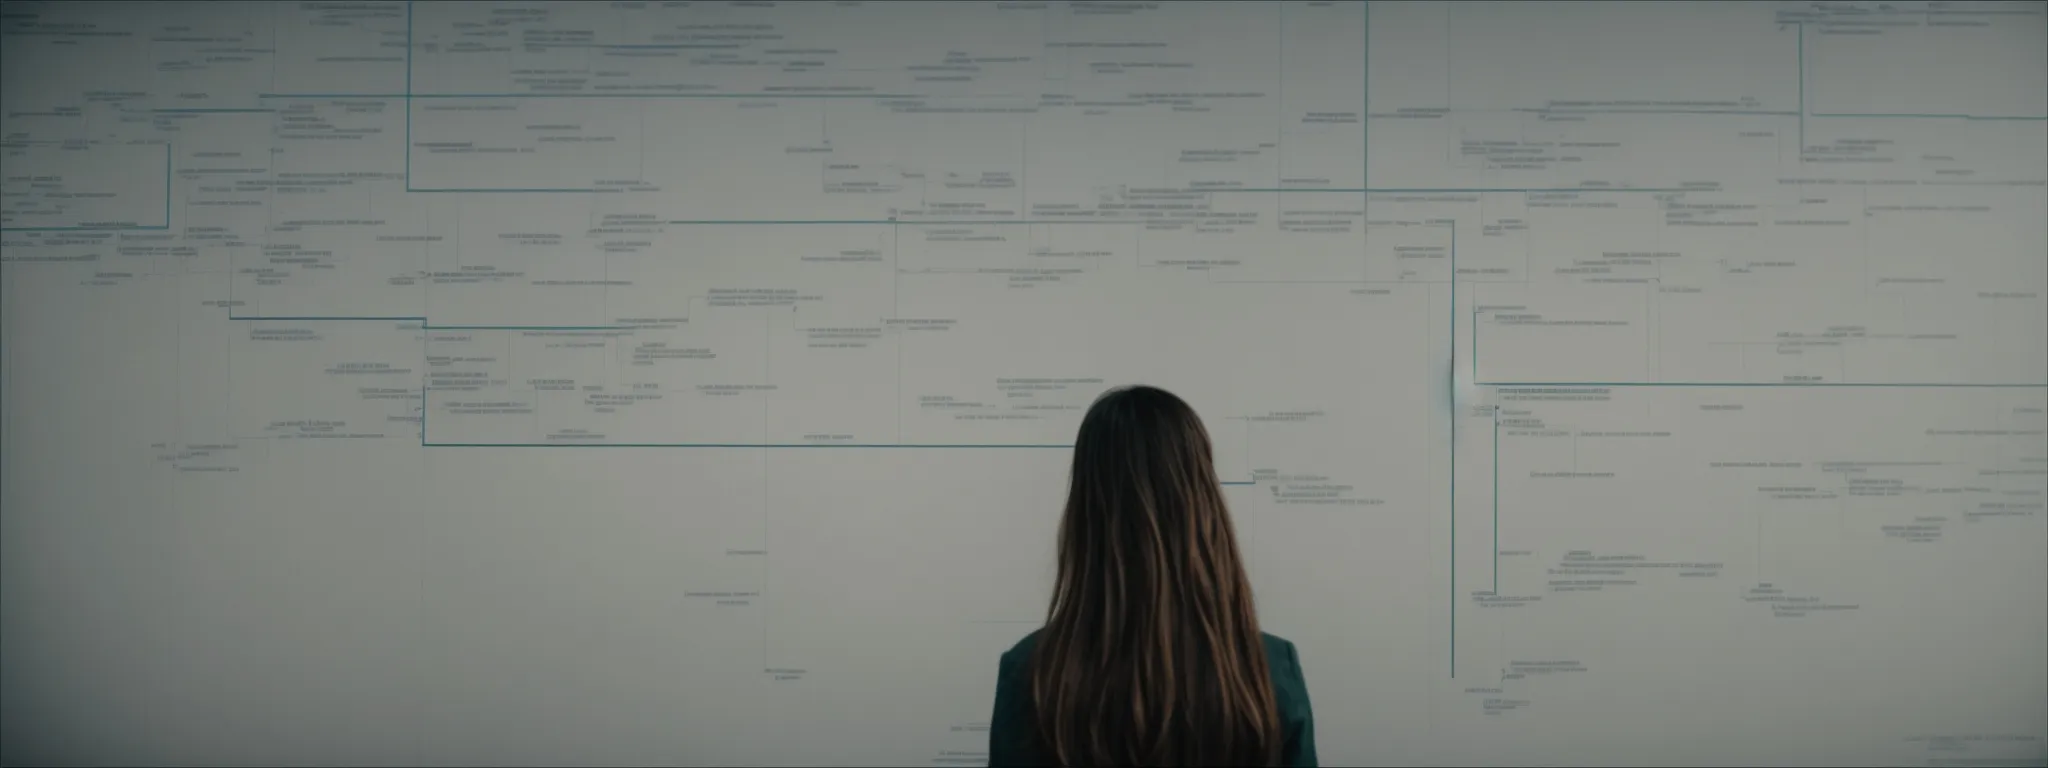 a focused individual peruses a simplified sitemap laid out on a large screen, showcasing an organized website structure.